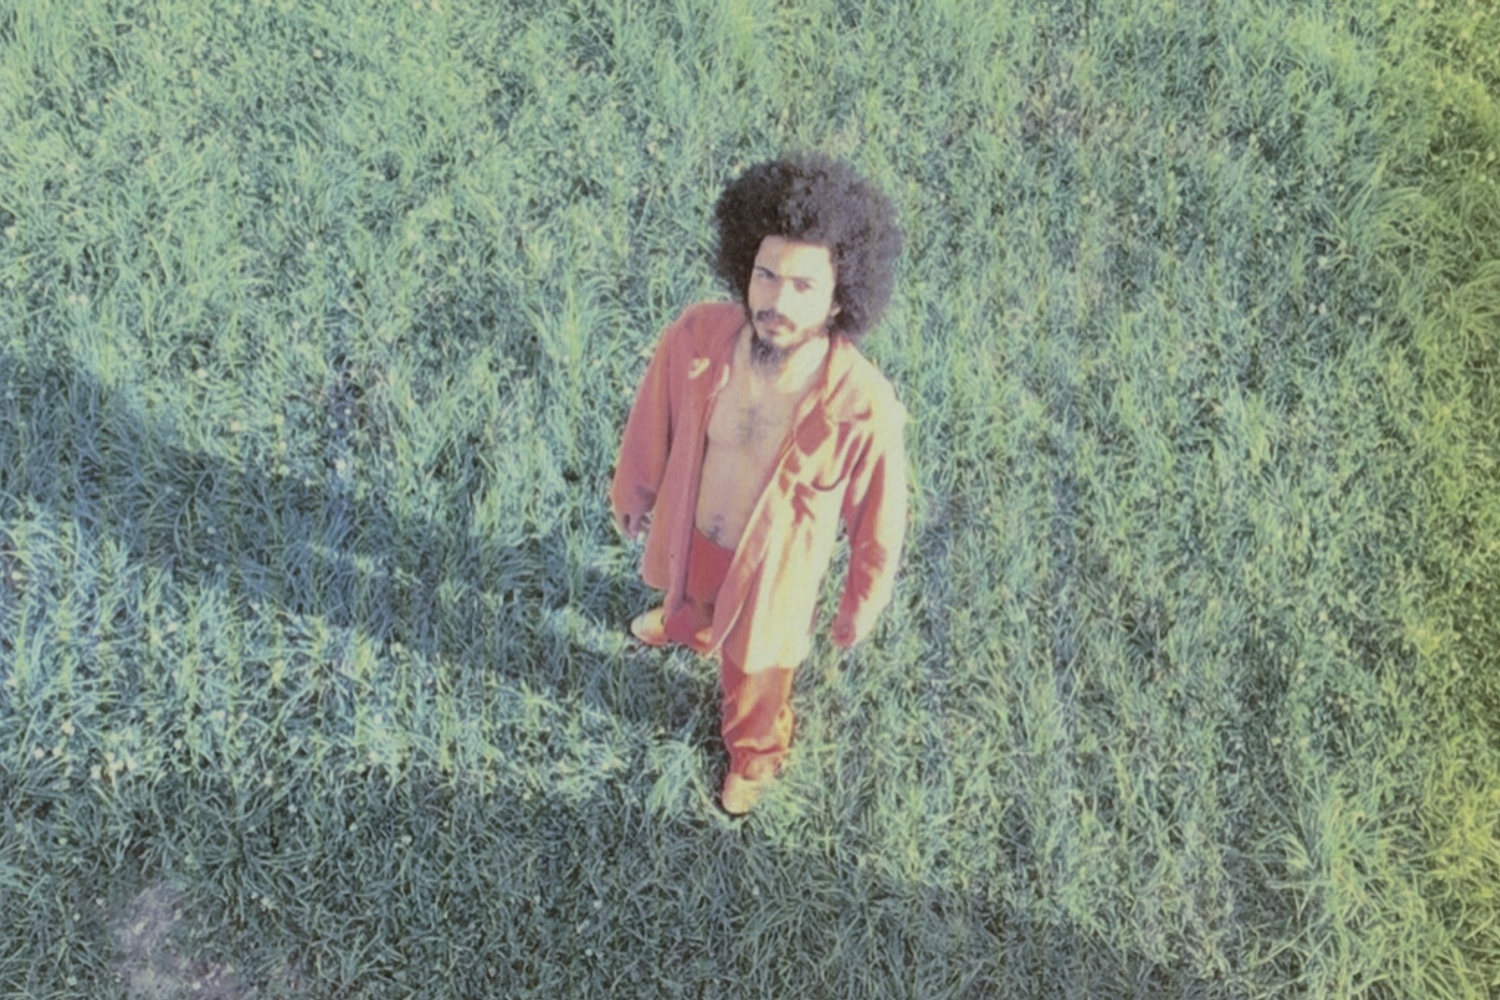 Yves Jarvis announces new album ‘Sundry Rock Song Stock’